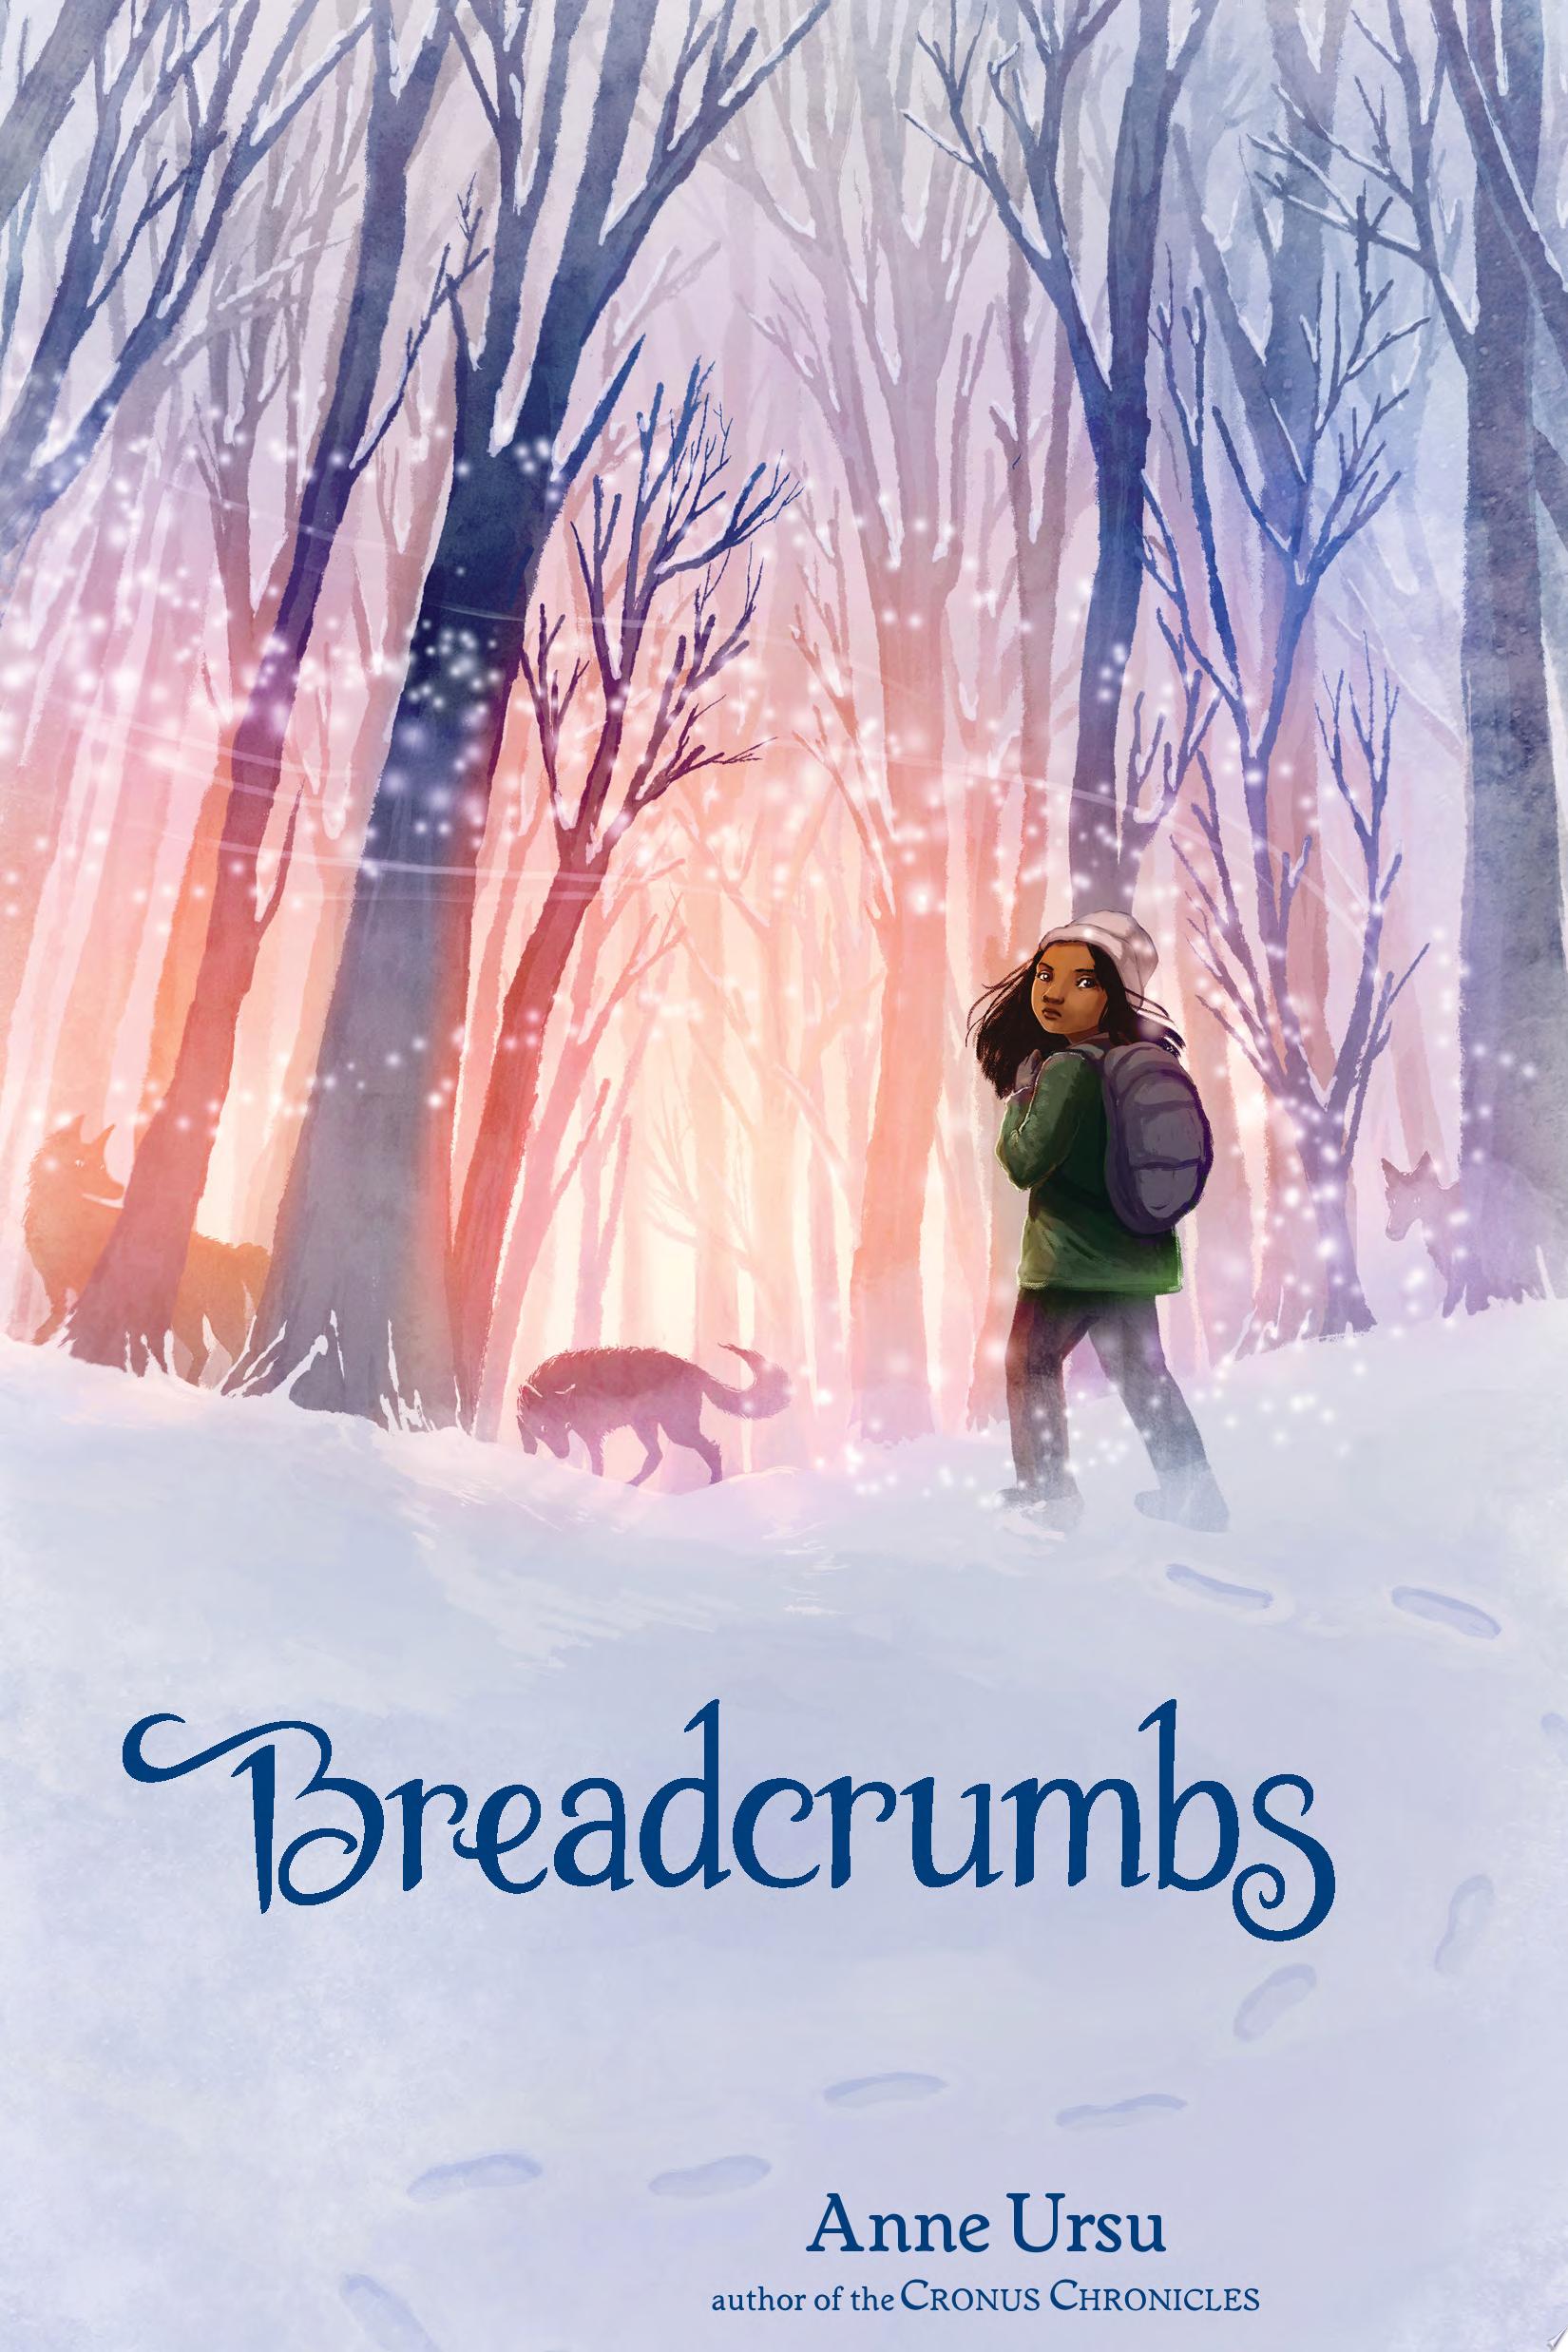 Image for "Breadcrumbs"